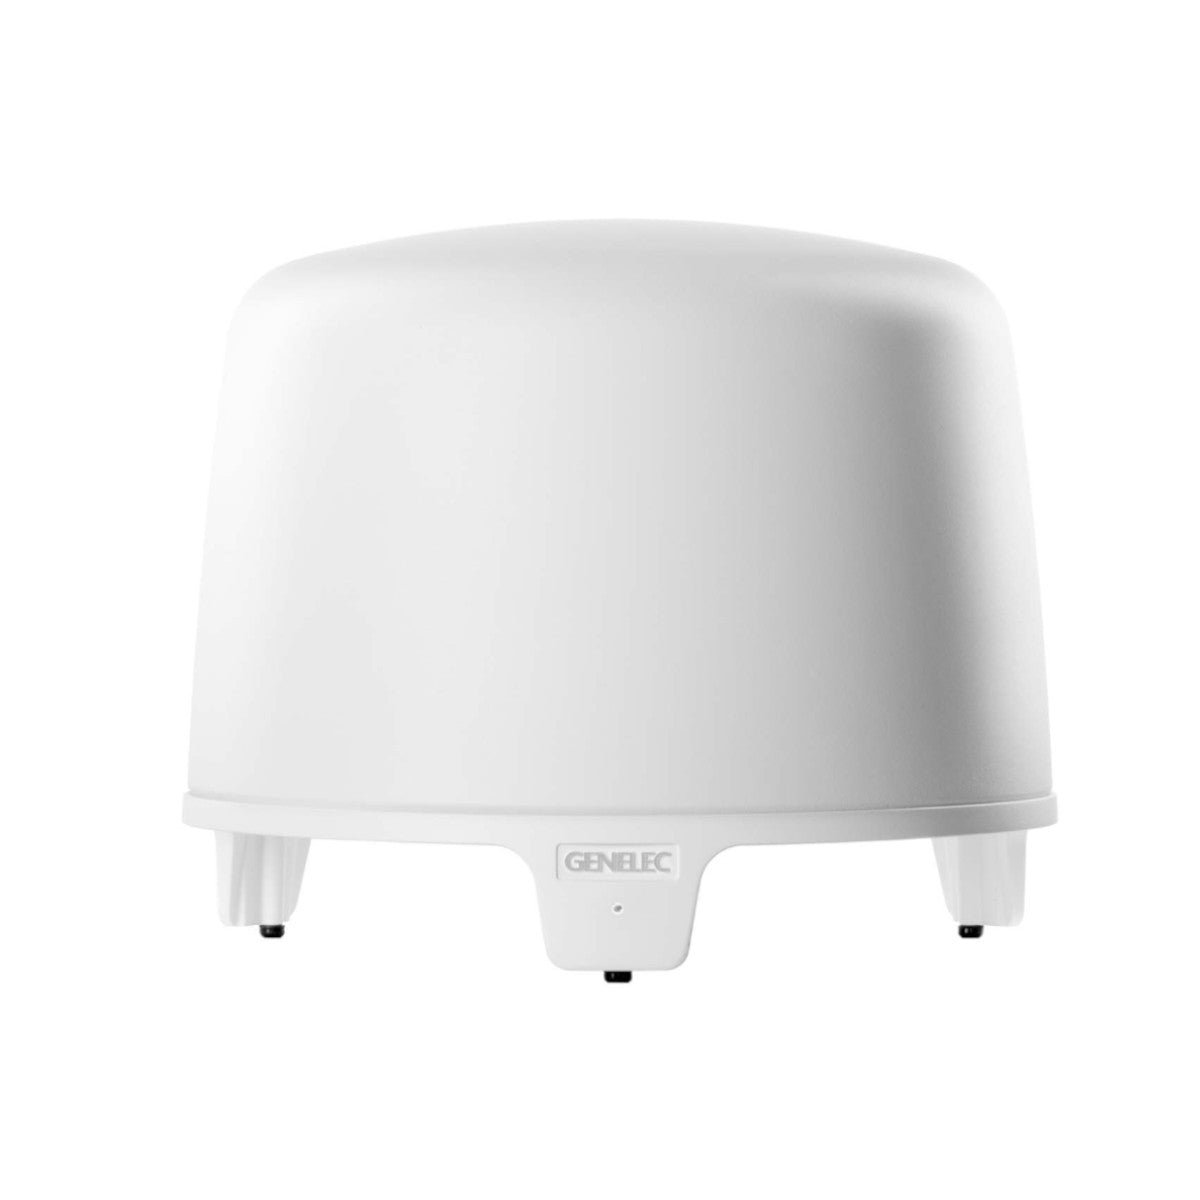 Genelec F One Active Subwoofer (White) - Ooberpad India